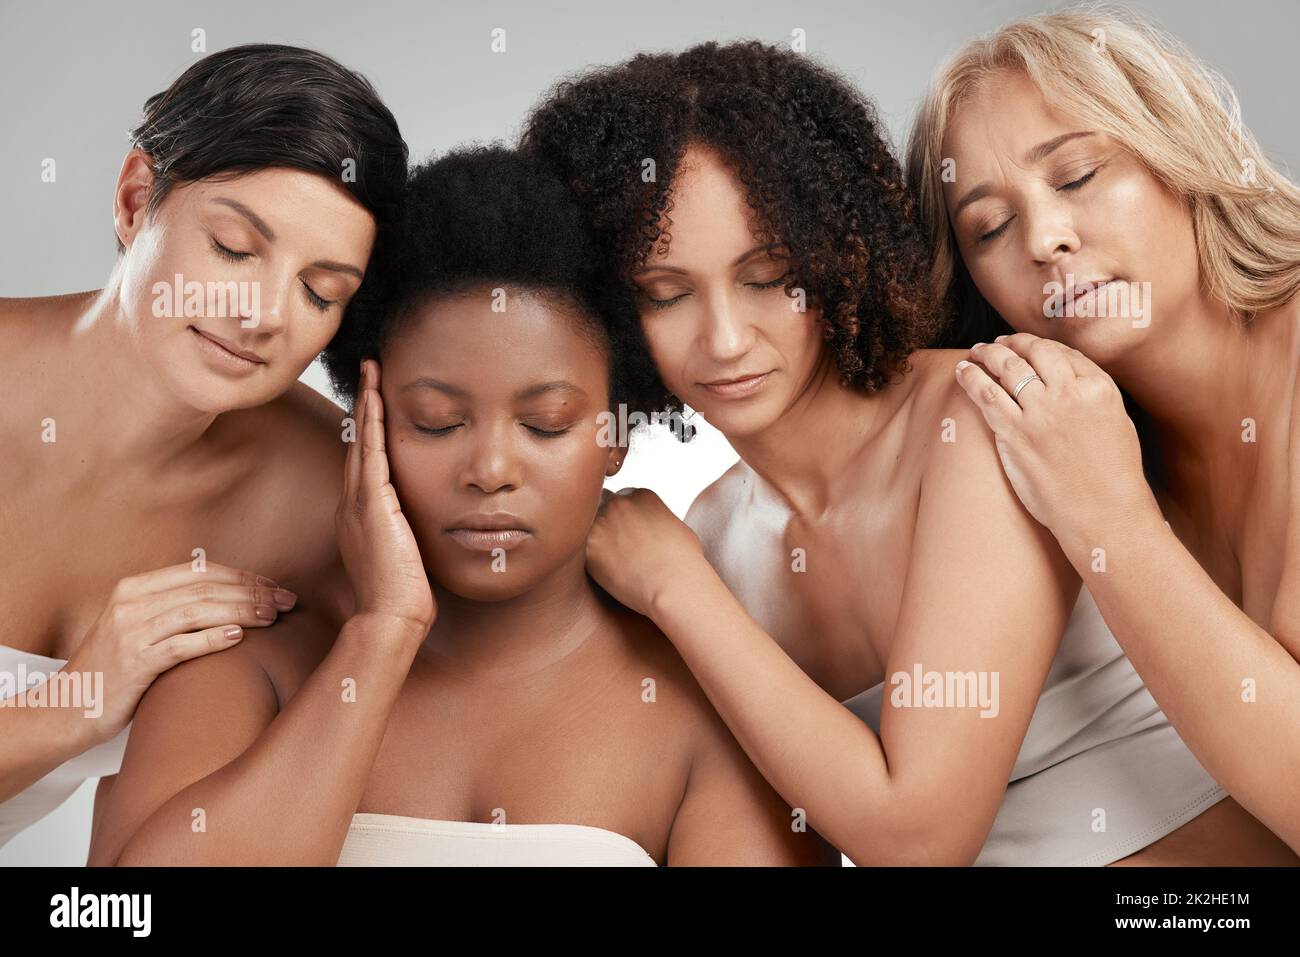 Were the essence of timeless beauty. Shot of a diverse group of women standing close together in the studio and posing. Stock Photo